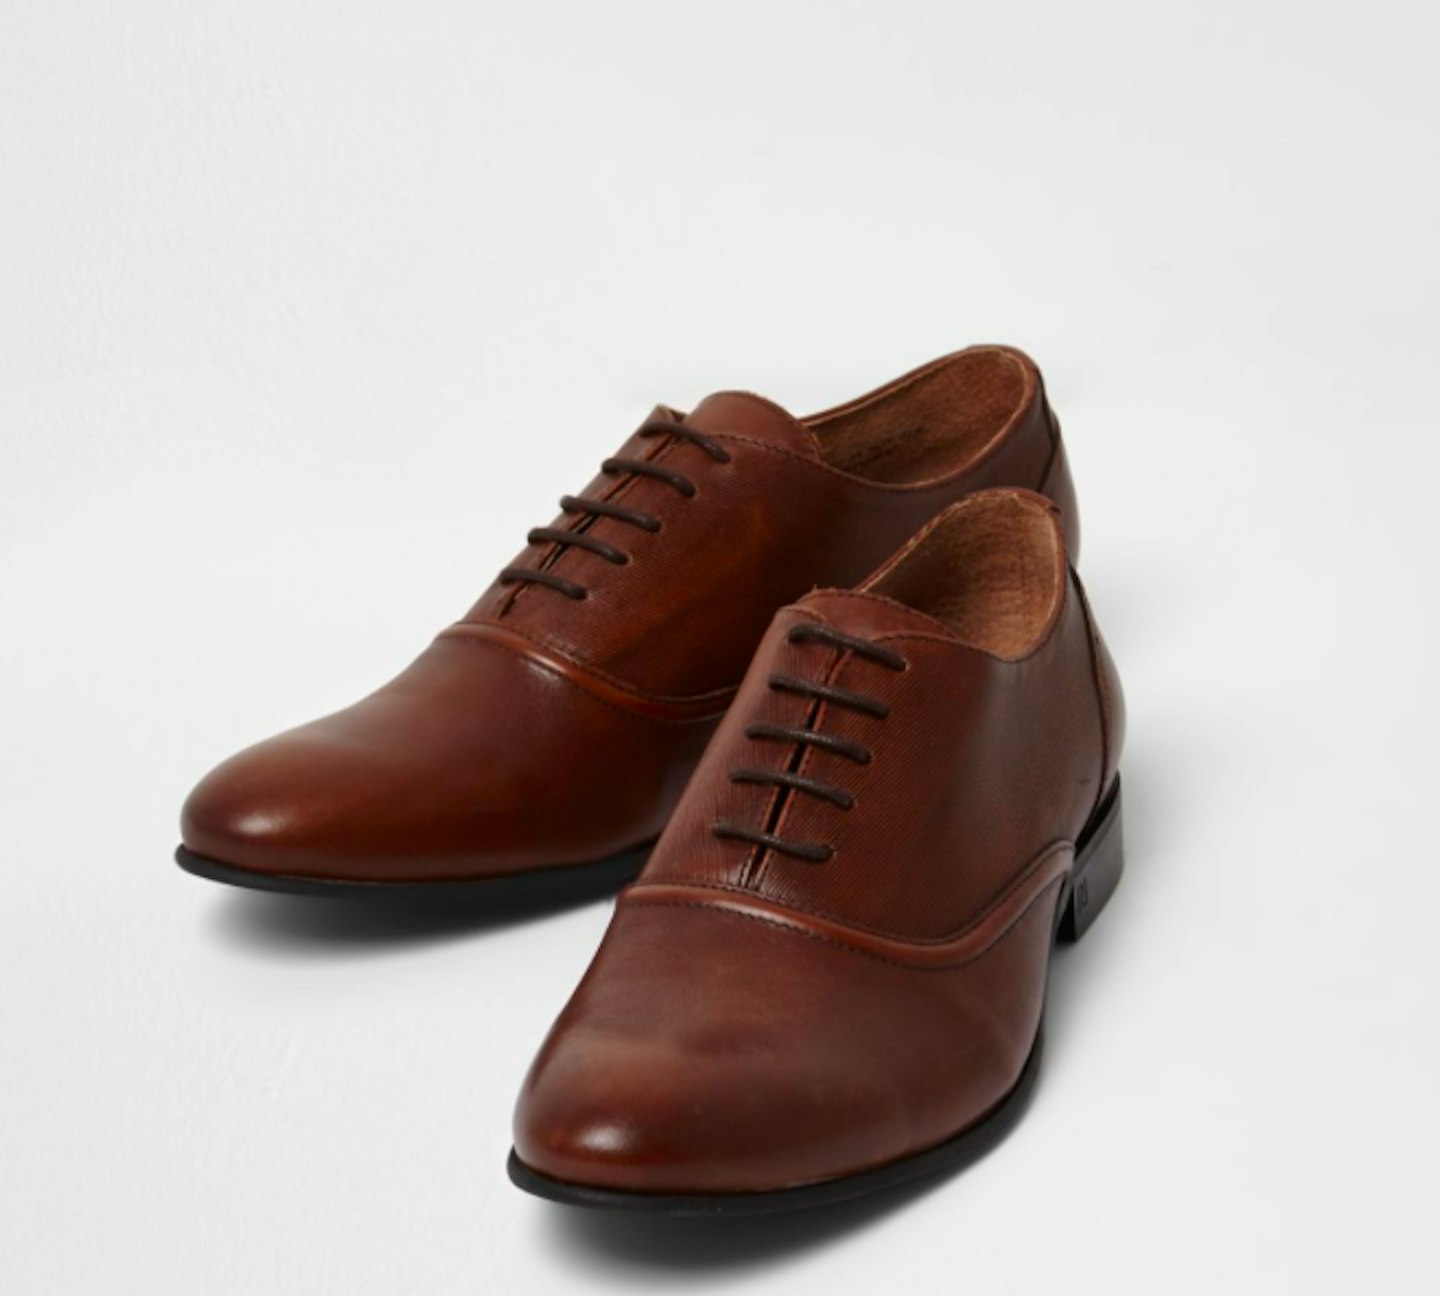 7) Leather lace Oxford shoes, £70, River Island